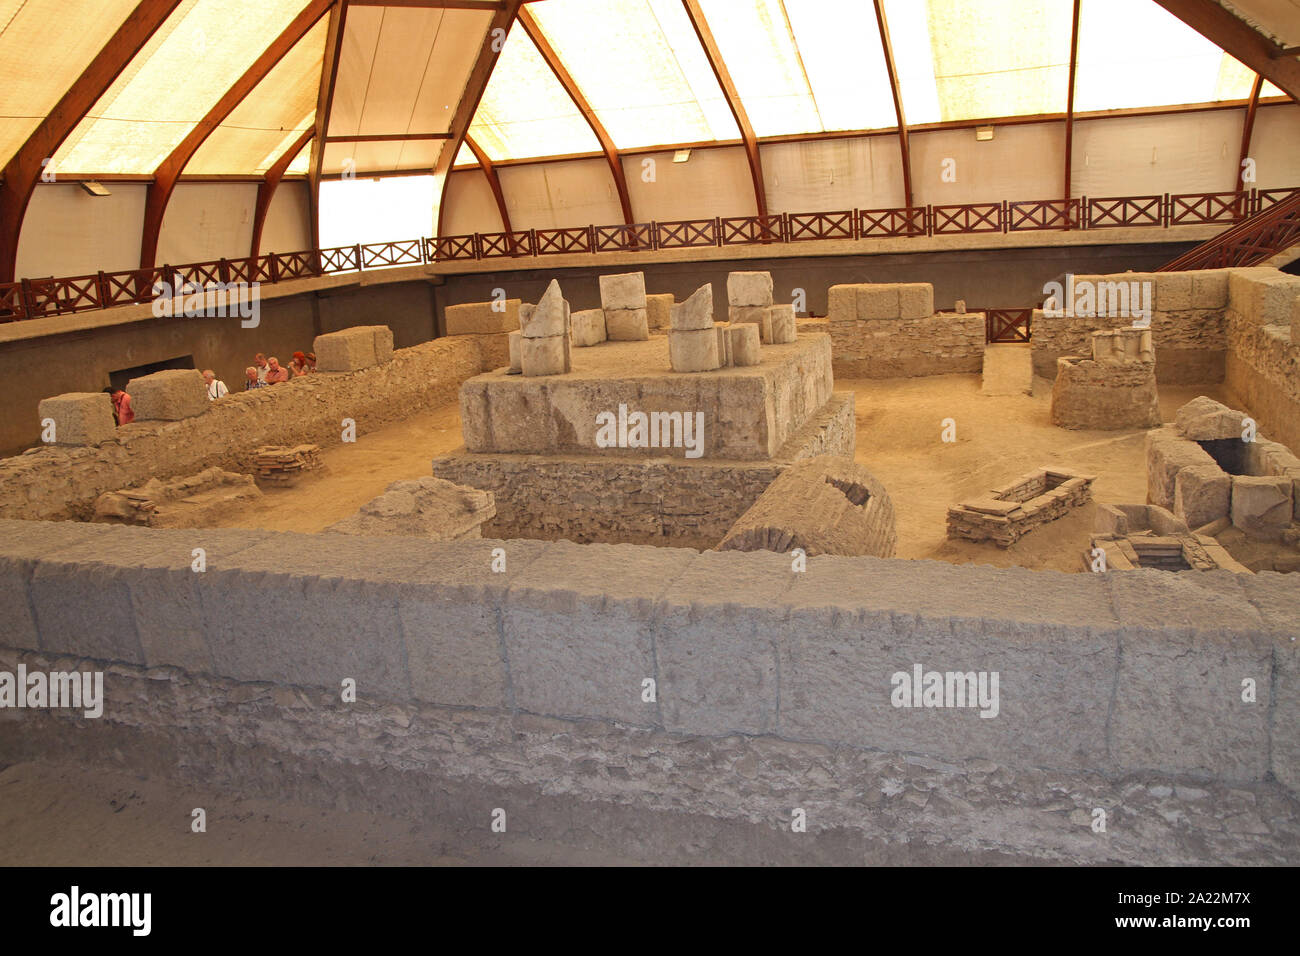 View of Ancient Roman ruins in the interior centre of Viminacium or Viminatium, an Ancient Roman military camp in the old Roman province of Moesia (today's Serbia), Kostolac, Branichevo District, Serbia. Stock Photo